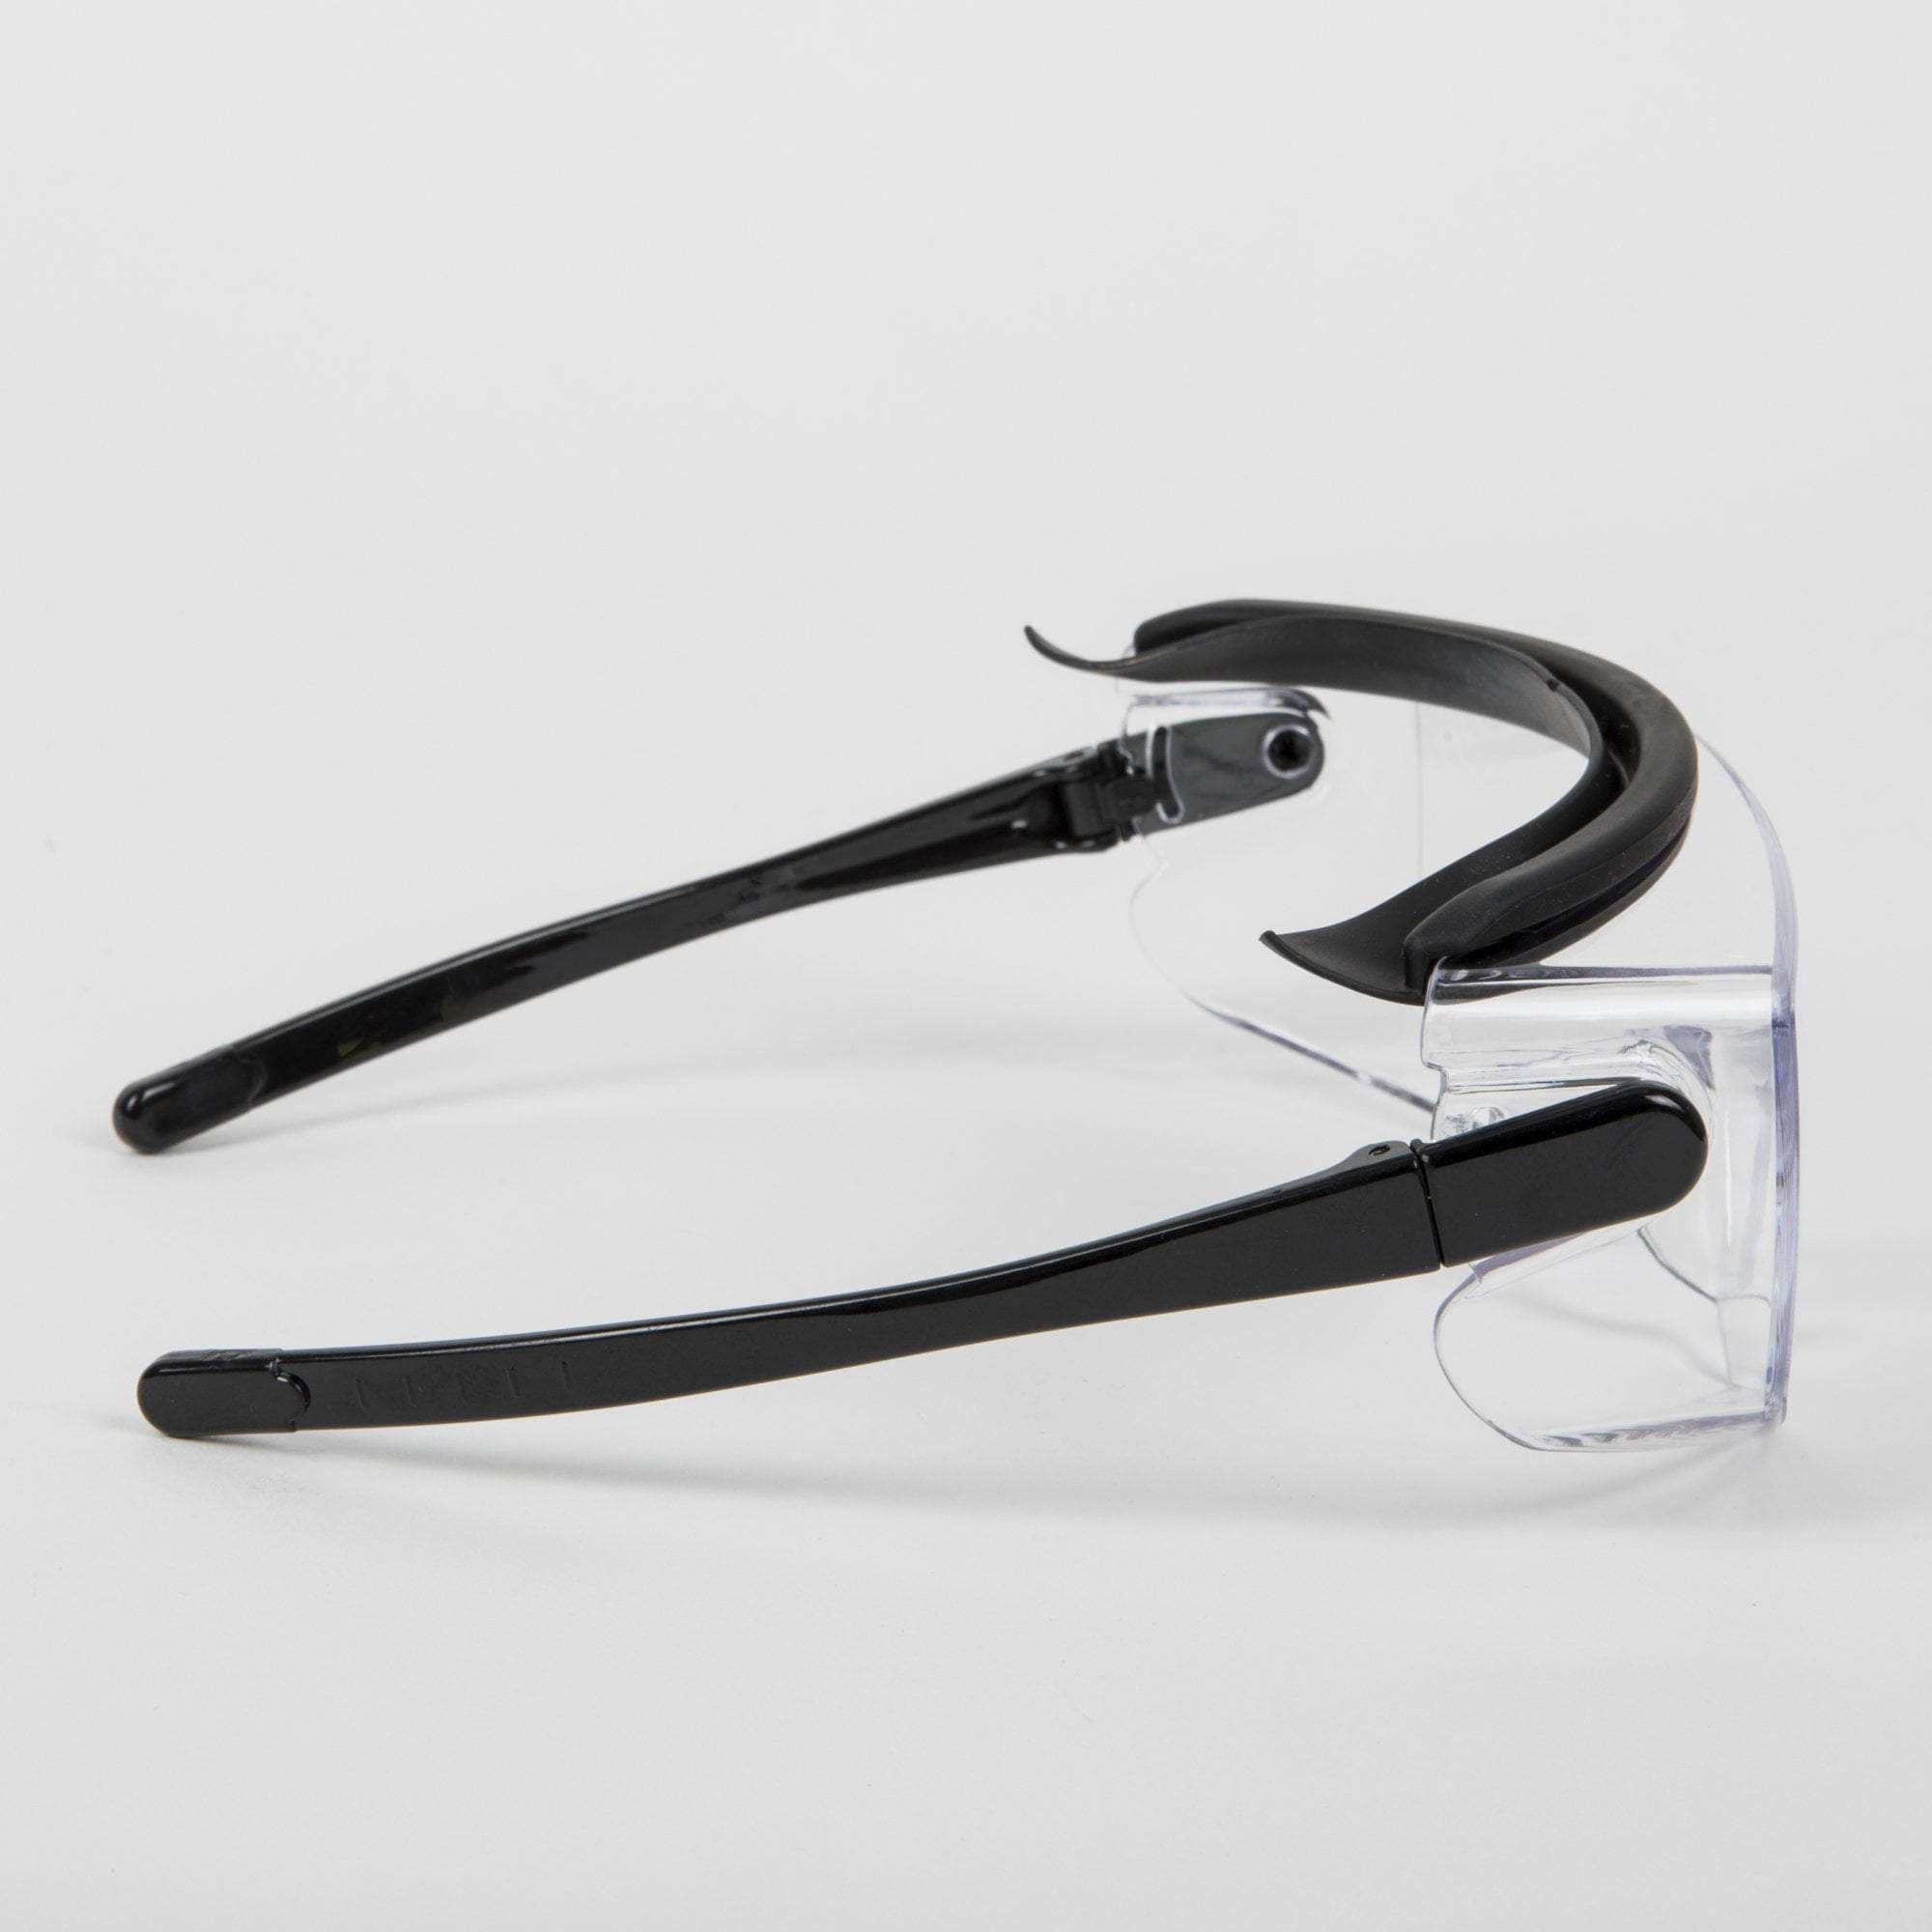 Face Masks & Eyewear Protective Goggles with Adjustable Arms